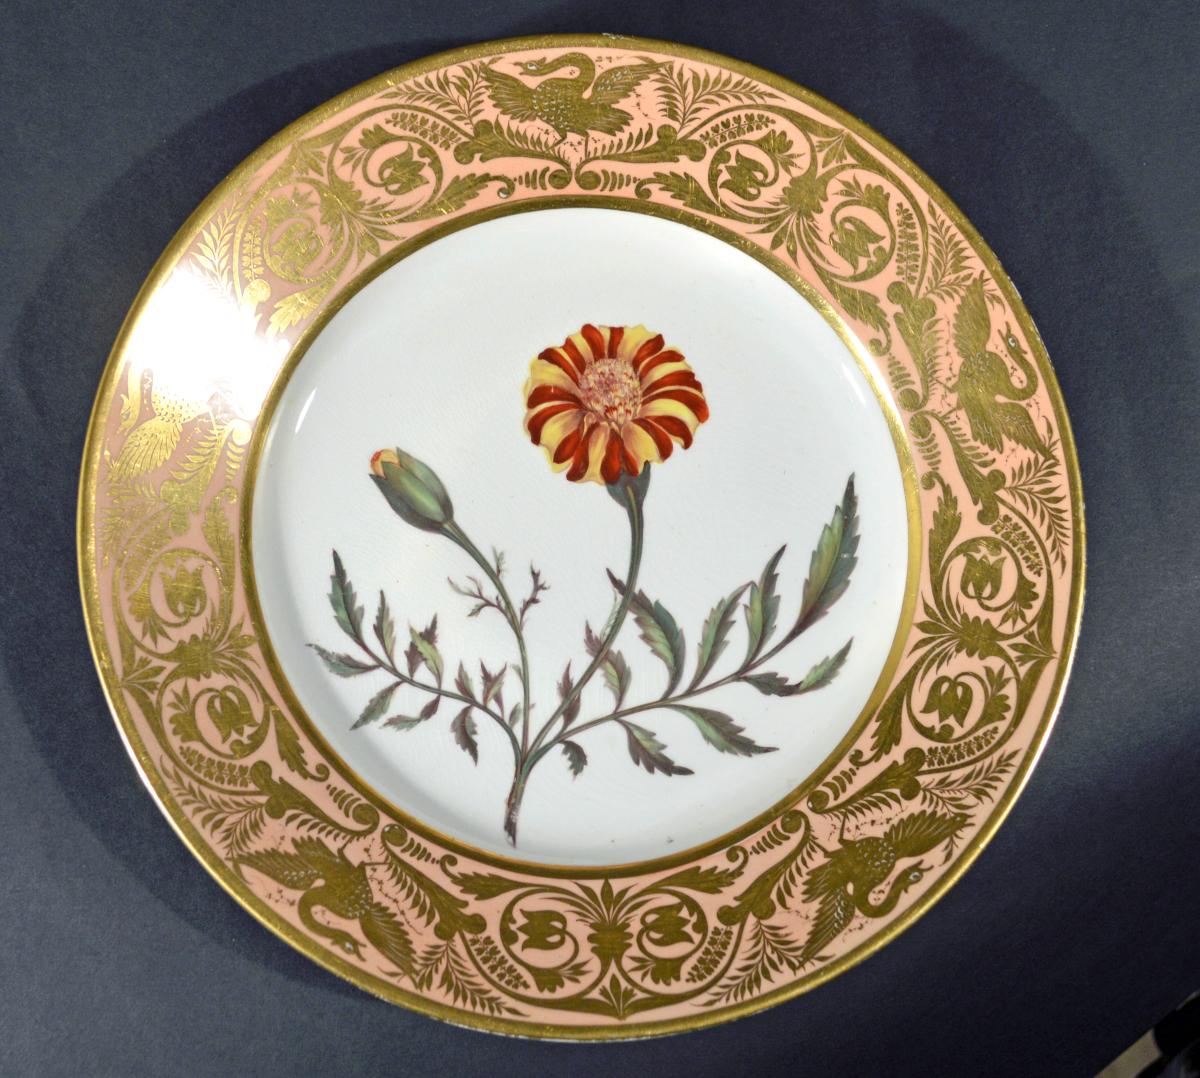 Antique Derby Porcelain Botanical Salmon-ground Plate, French Marigold, by John Brewer, Circa 1815.